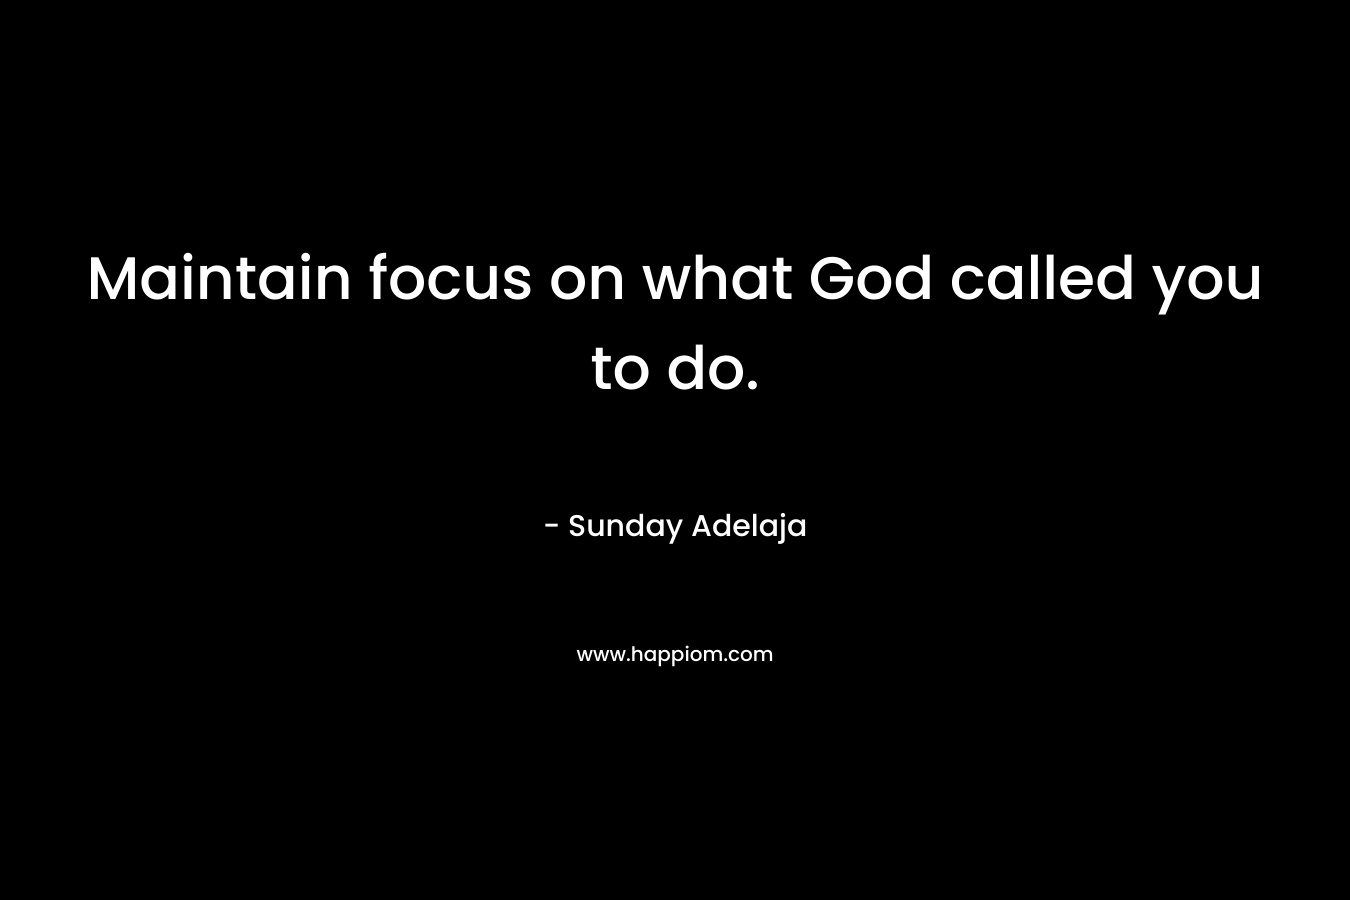 Maintain focus on what God called you to do.